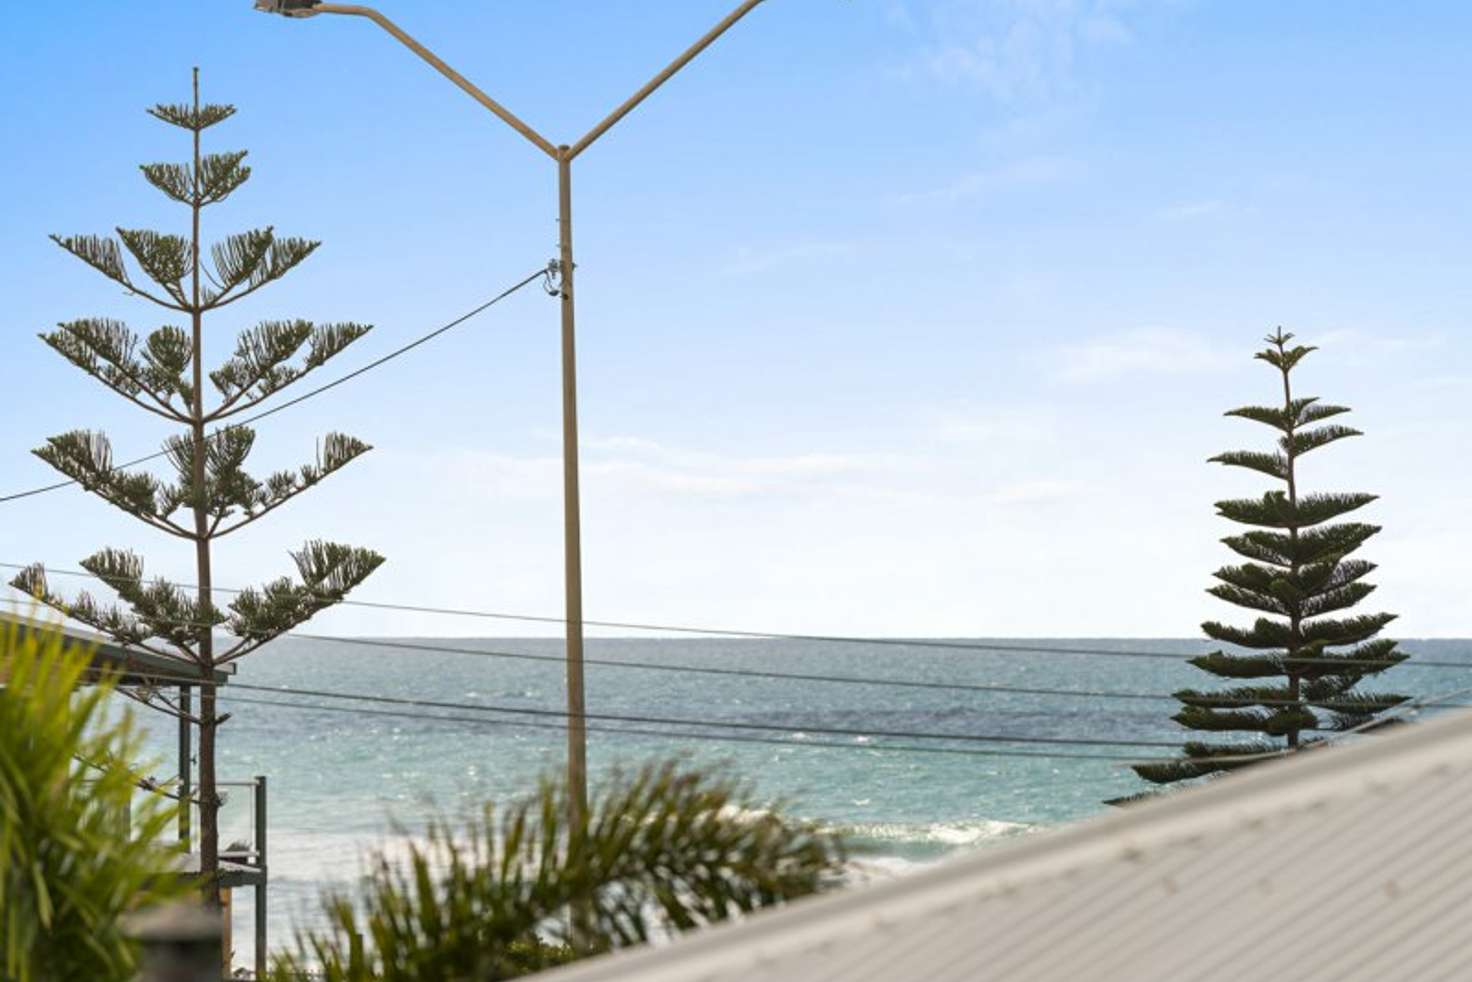 Main view of Homely apartment listing, 6/26 Oconnor St, Tugun QLD 4224